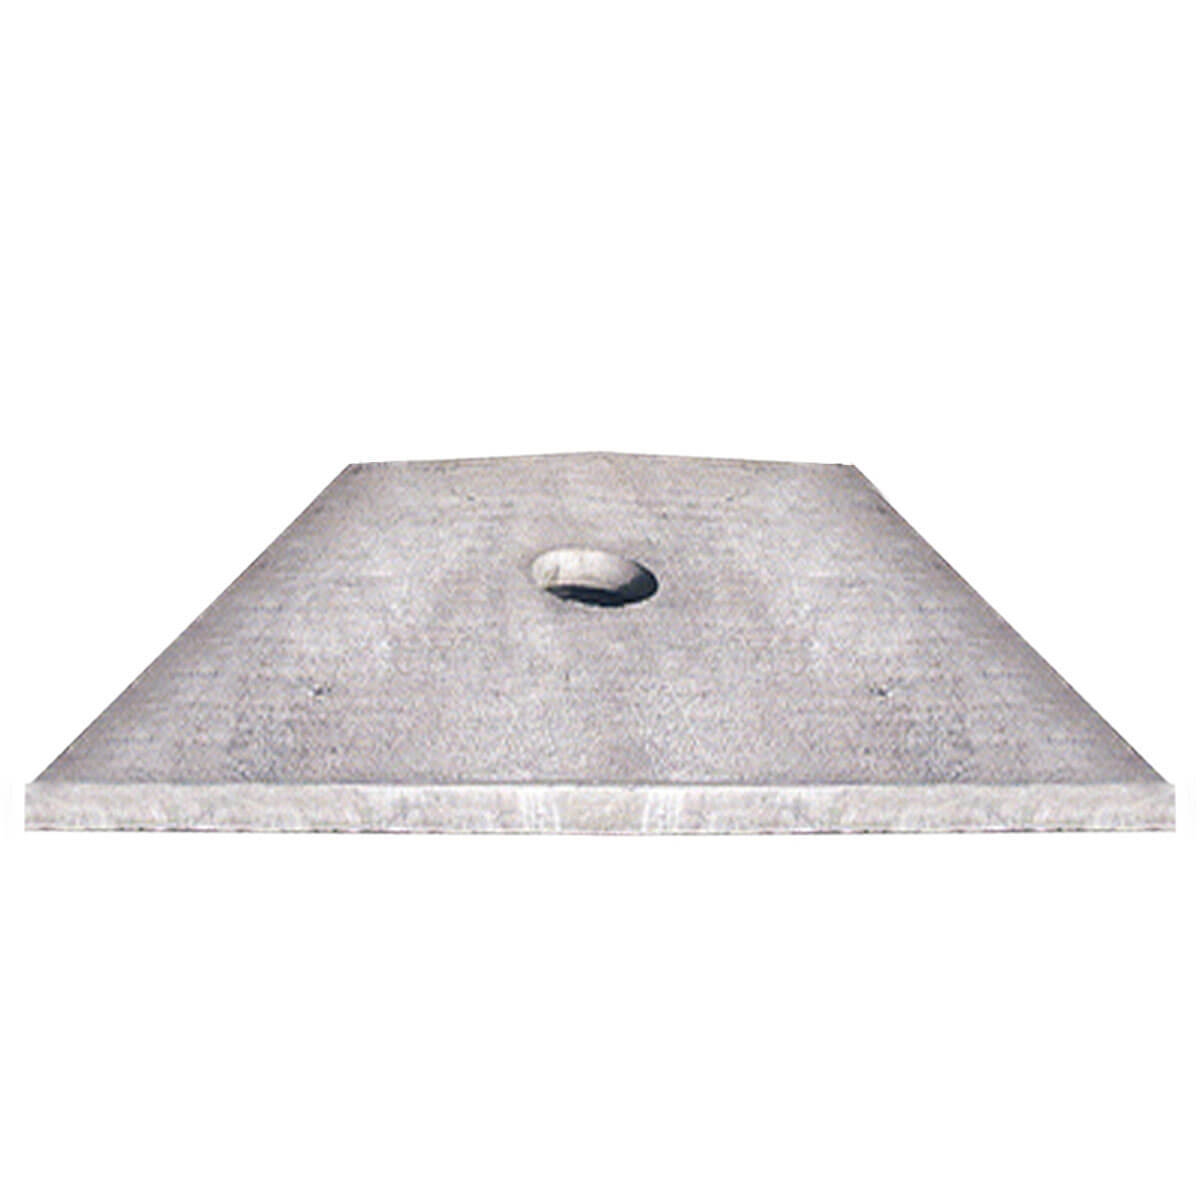 Concrete Waterer Pad - 7-ft 6-in x 6-ft 6-in